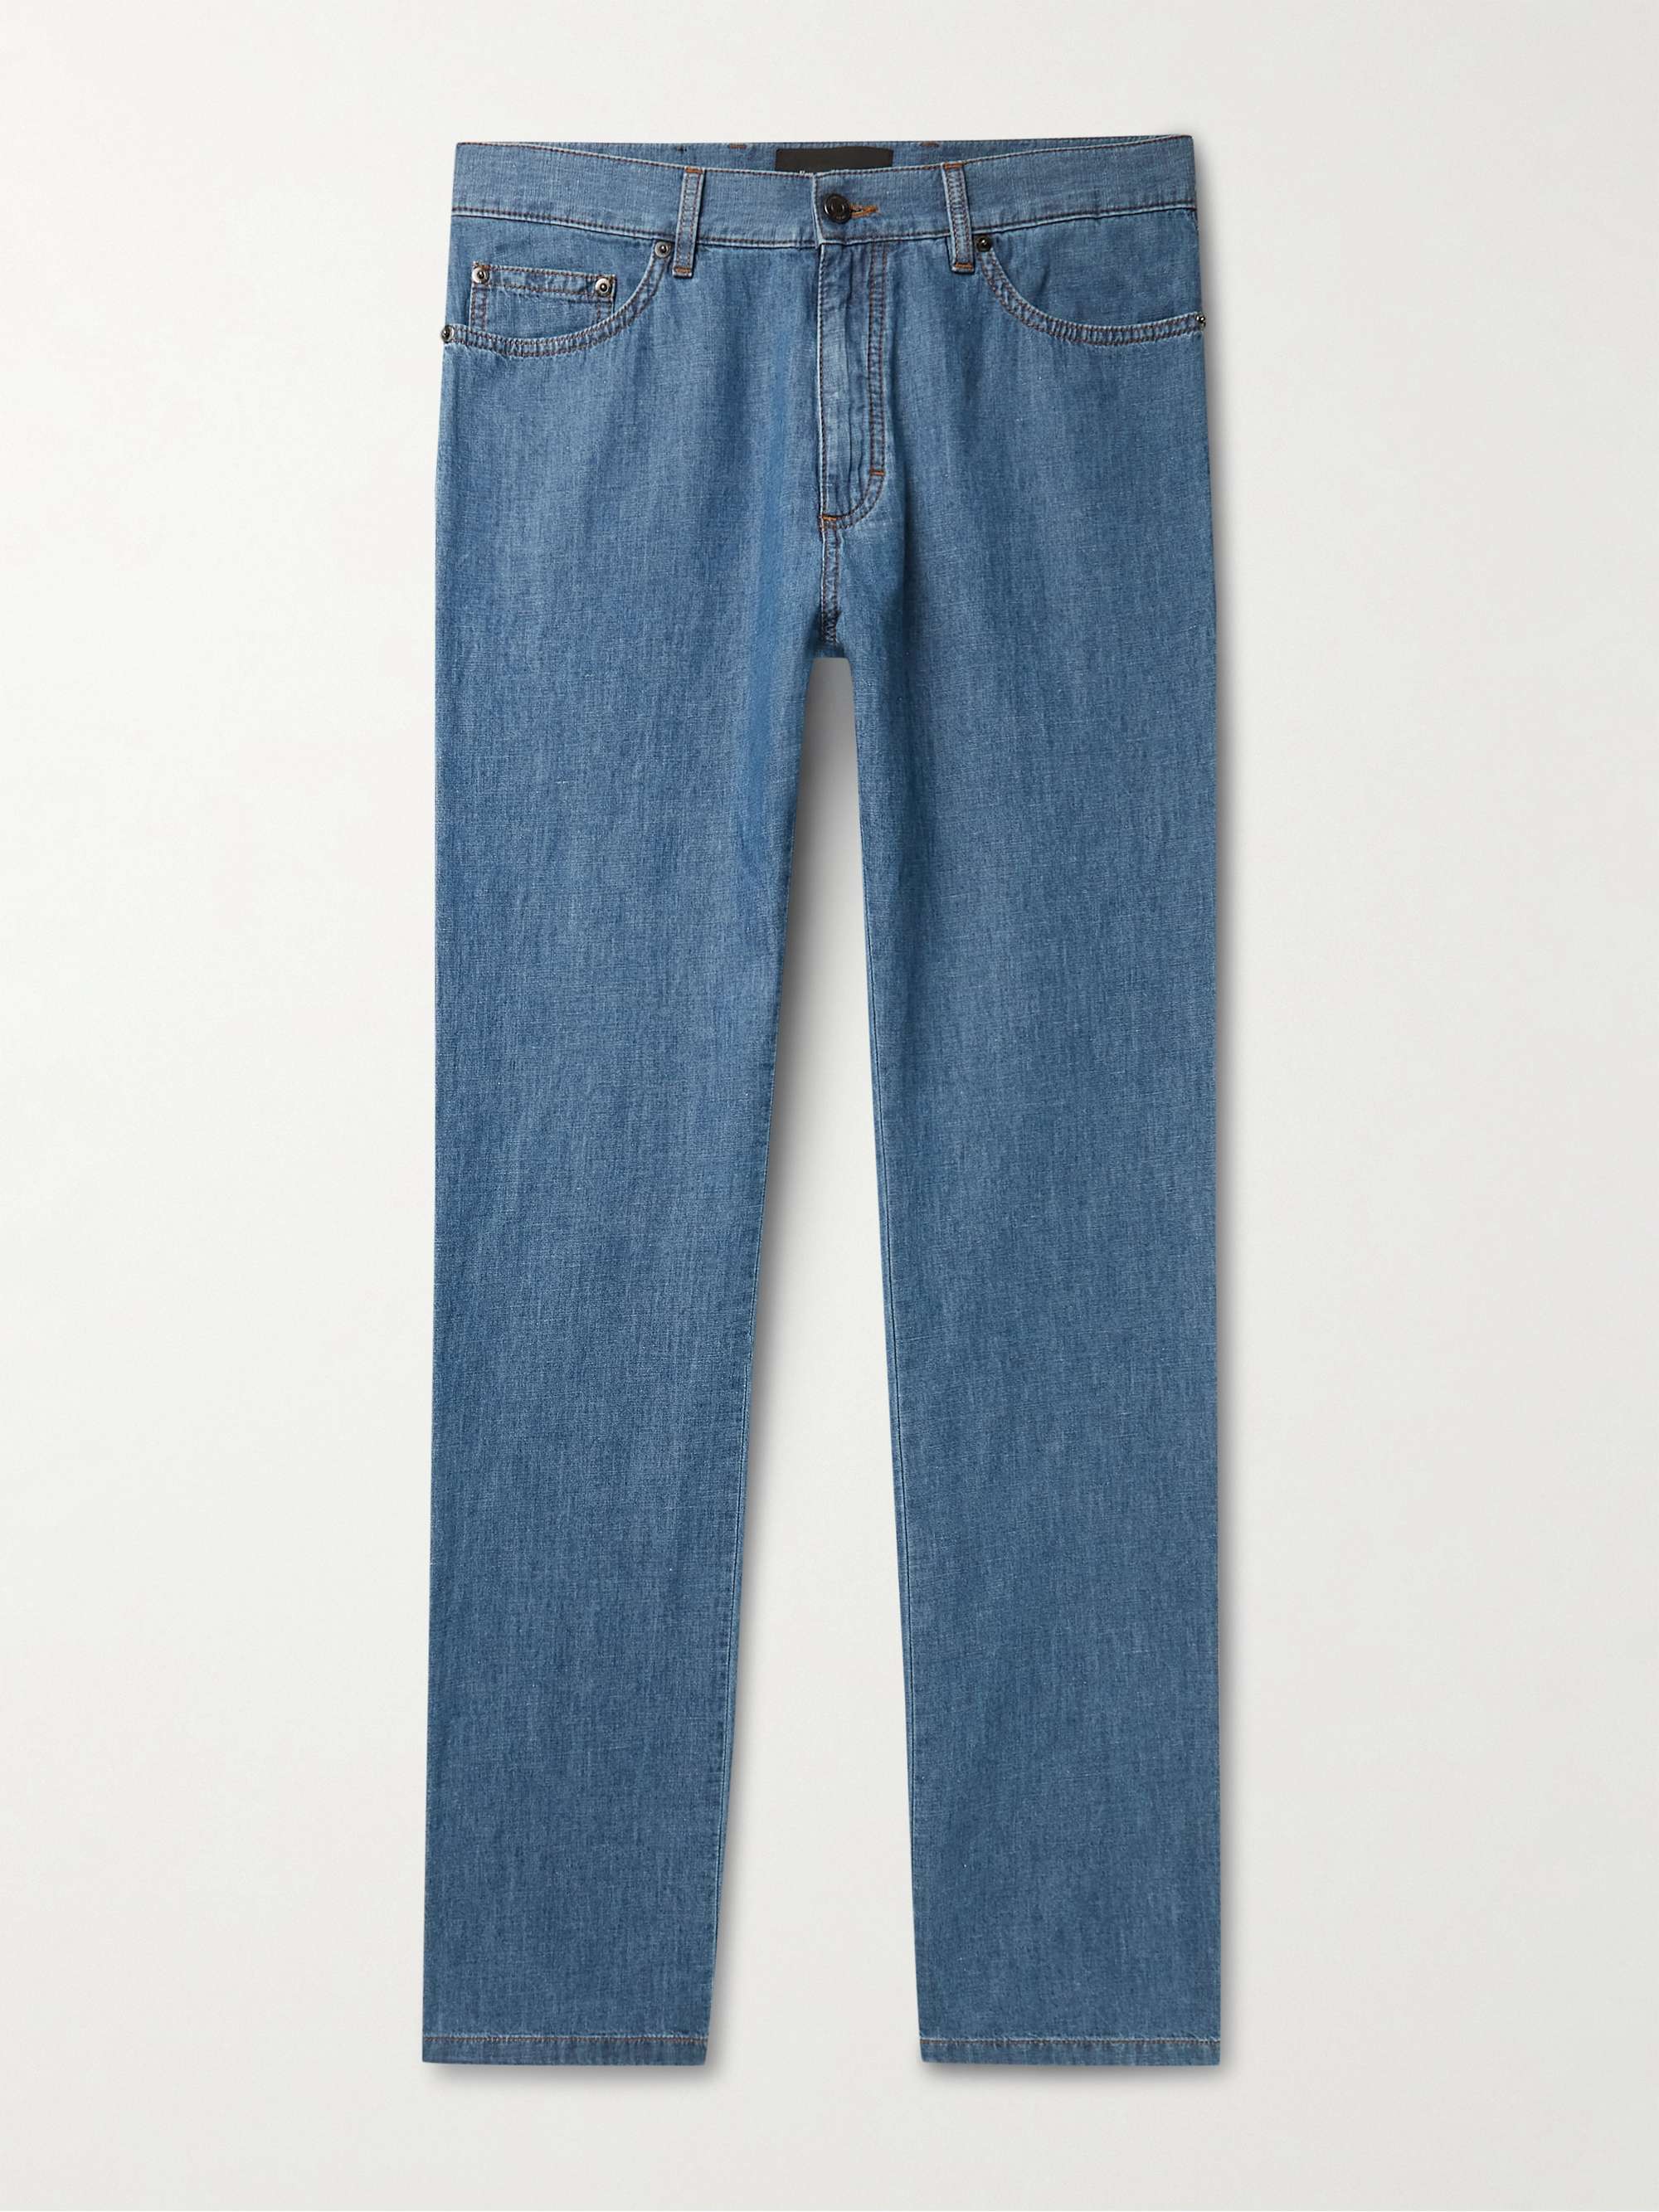 Blue Stone Washed Jeans by GAUCHERE on Sale-saigonsouth.com.vn